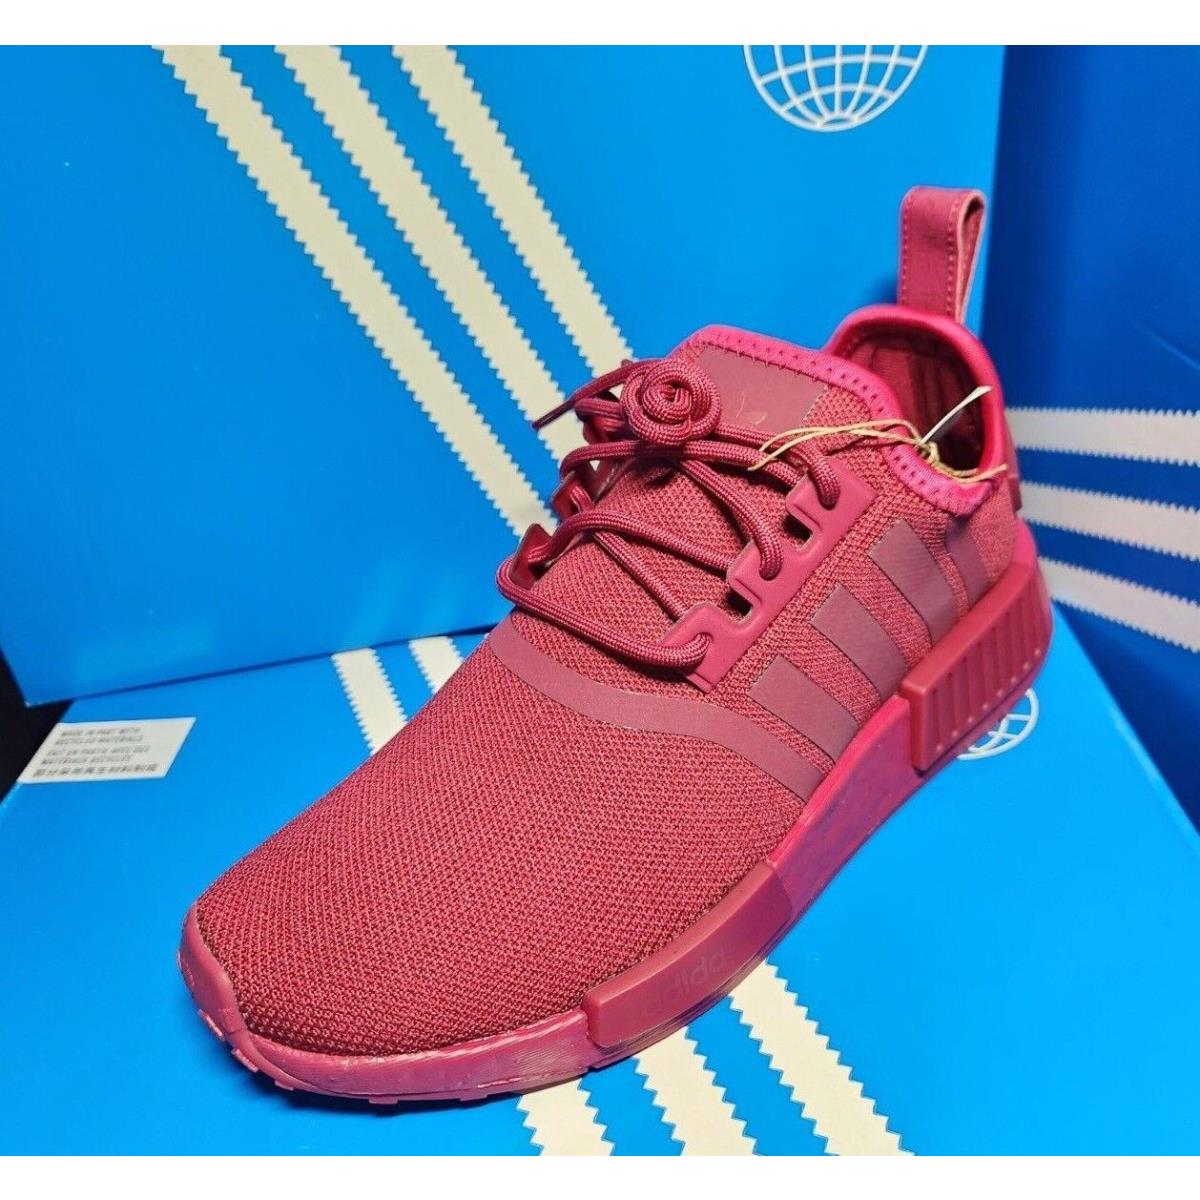 Adidas Women`s Nmd Triple Maroon Burgundy Red Bordeaux Shoes HP9662 | 692740423418 - Adidas shoes NMD - Red | SporTipTop